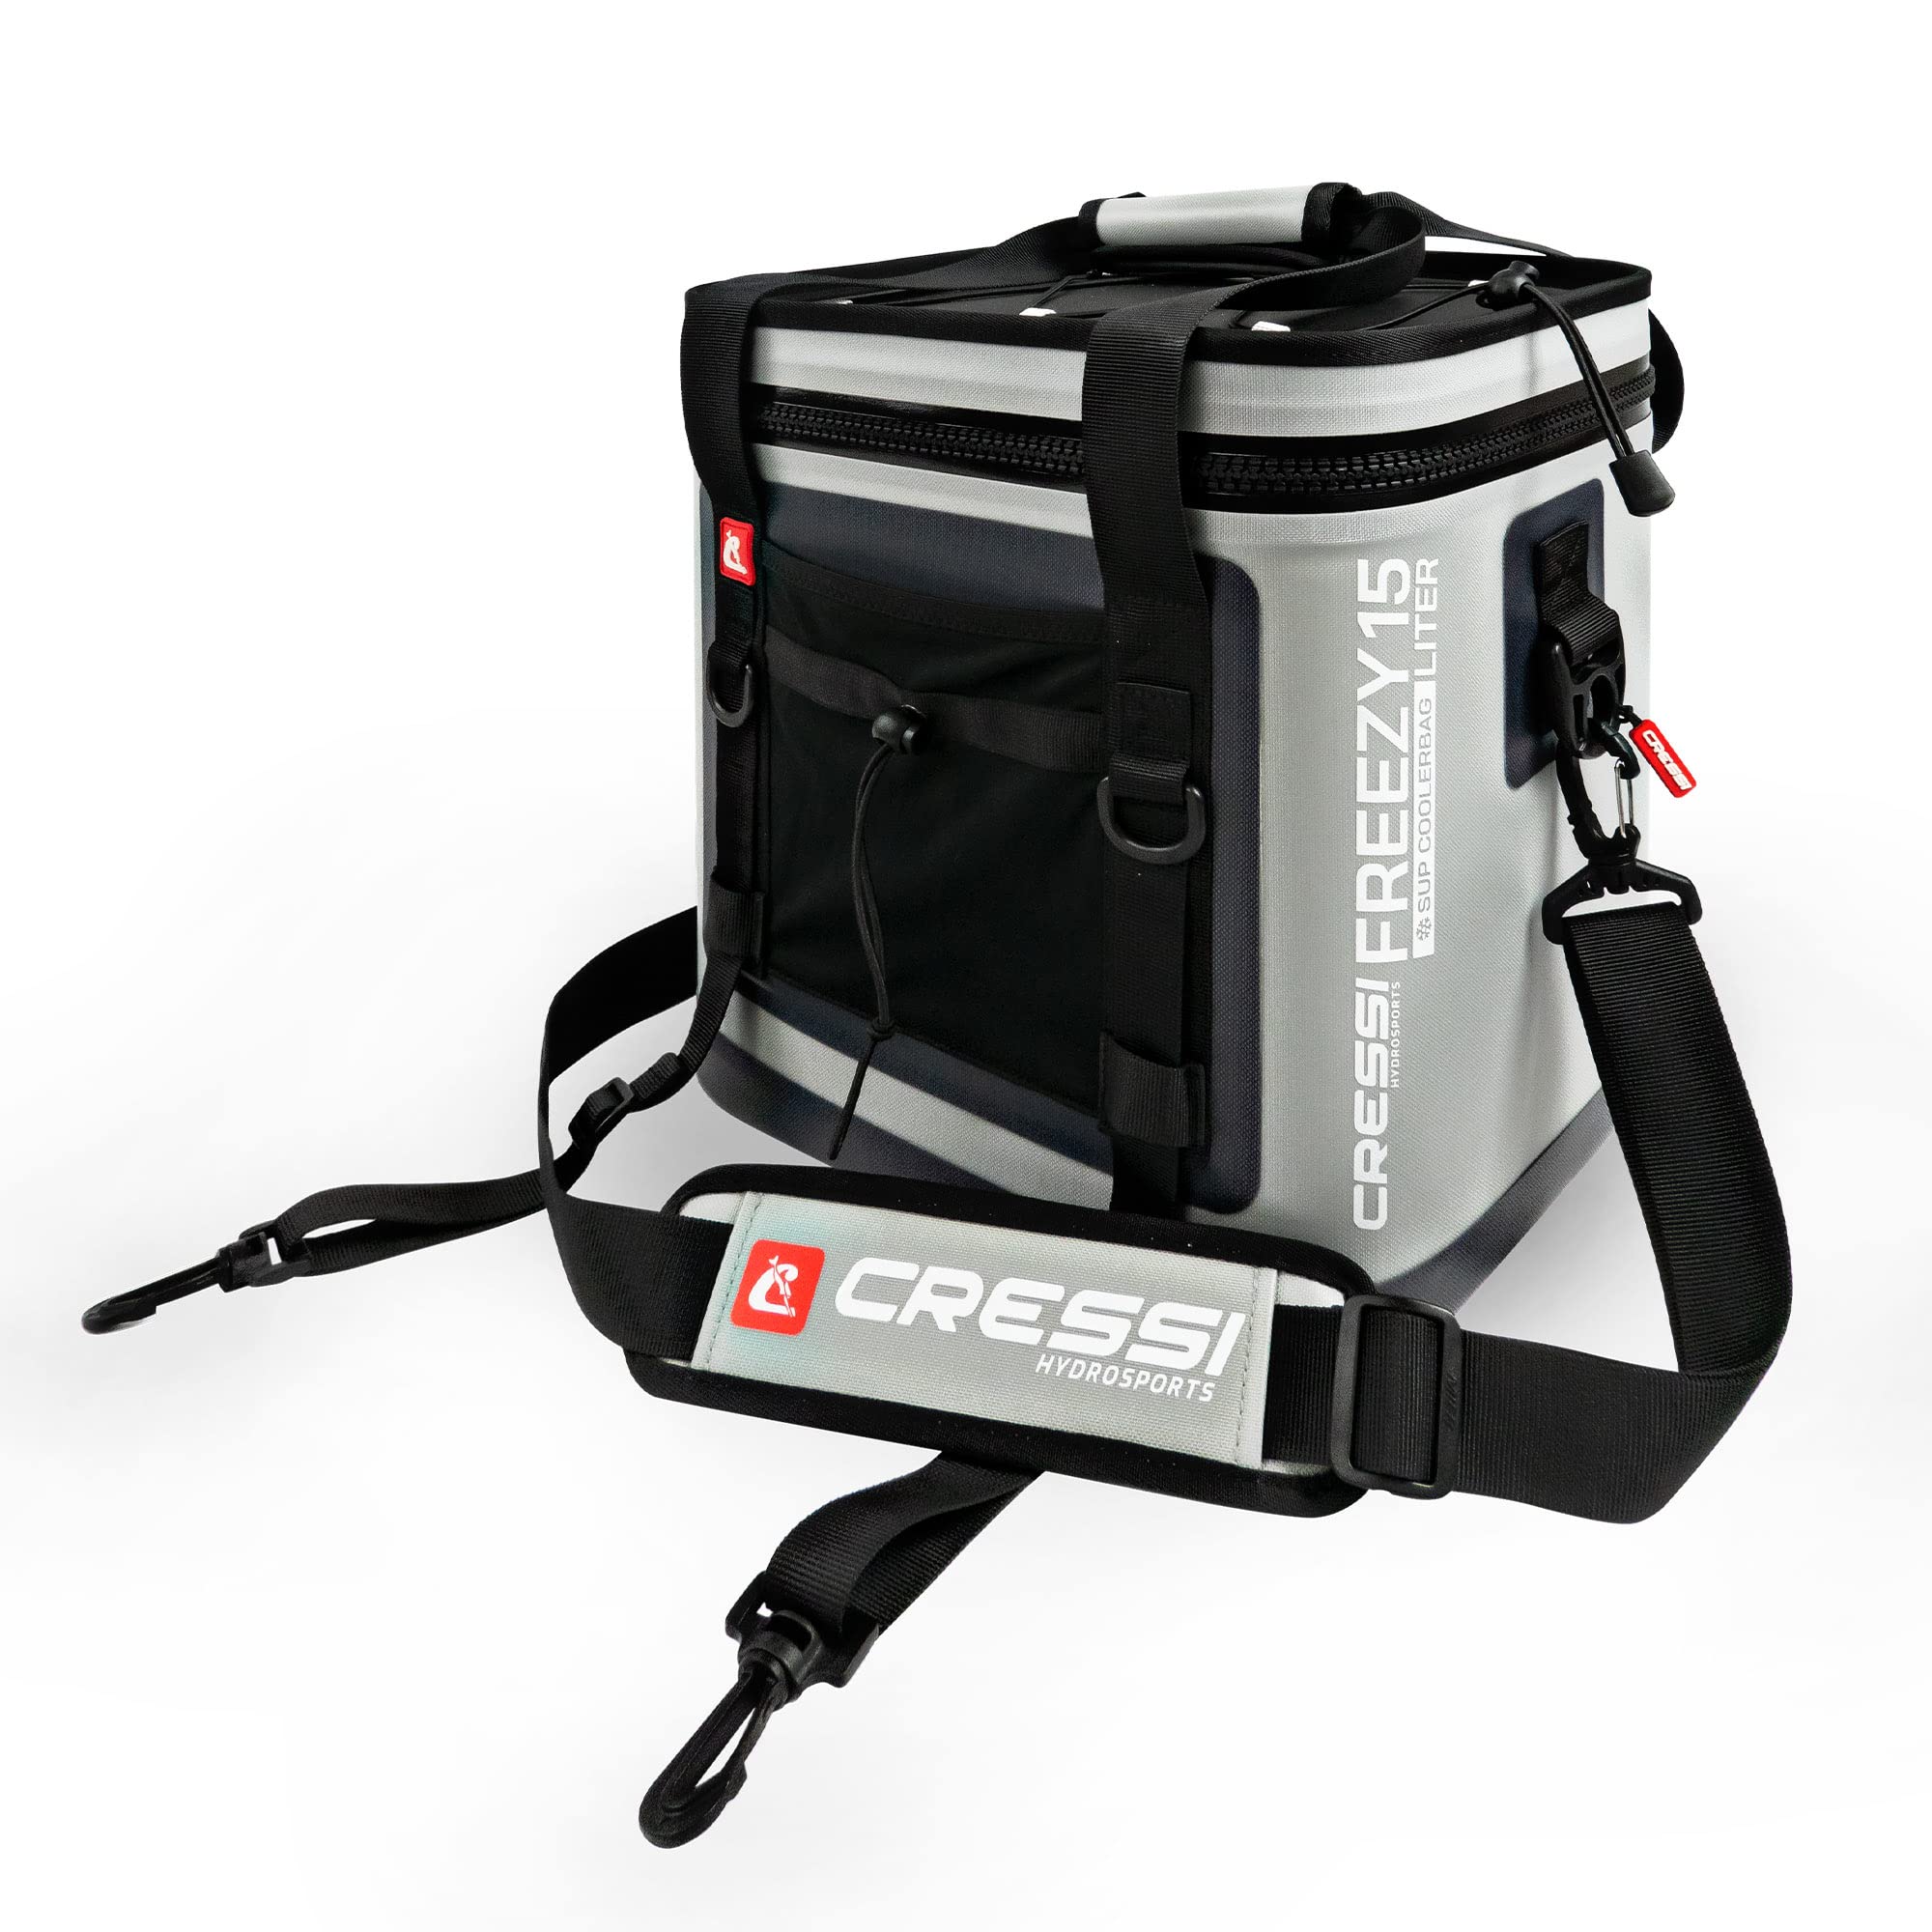 Cressi Insulated Cooler Bag - Watertight Zipper, Waterproof - Designed for Fixing to D-Rings on iSUP Boards - Freezy: Designed in Italy